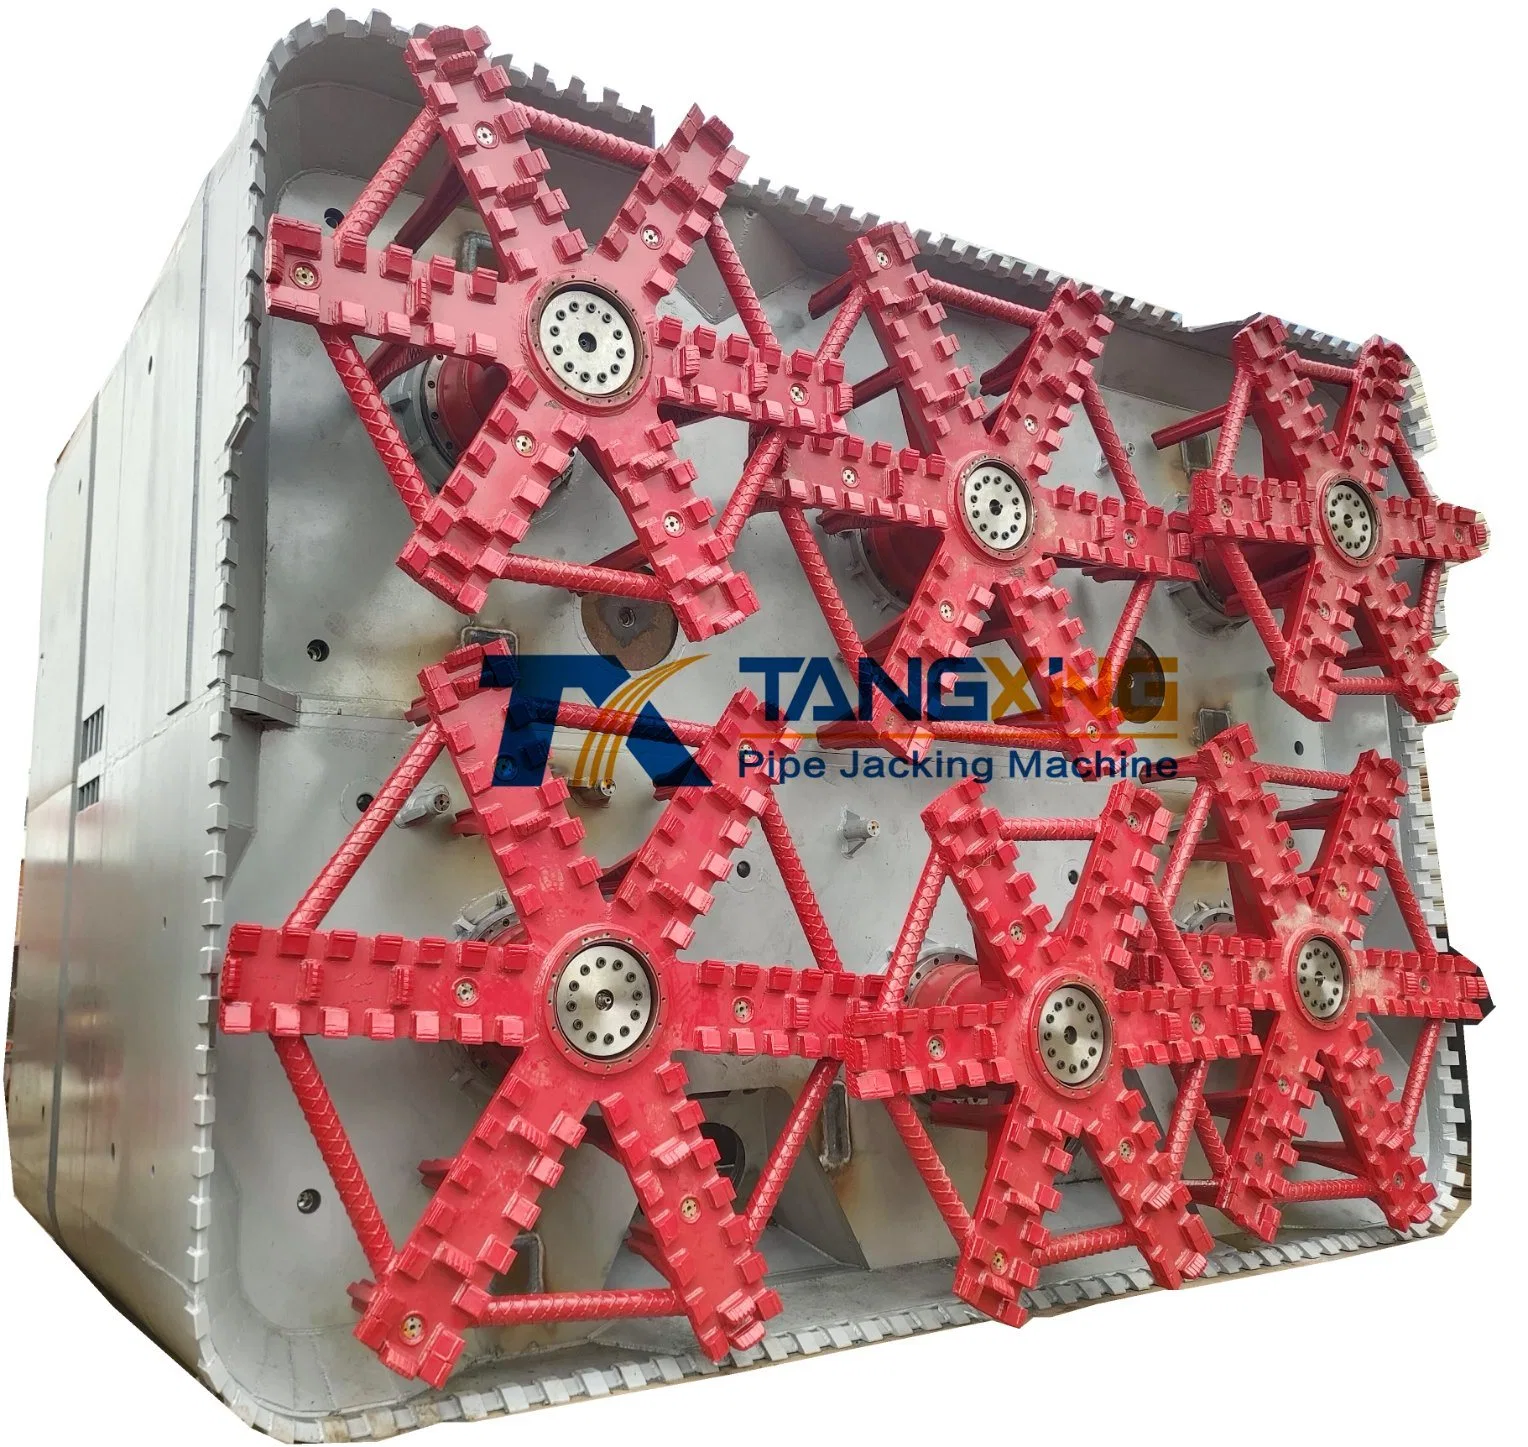 Tangxing Rpb Series Pipe Jacking Machine for Rectangular Pipes with Light Weight Good Quality